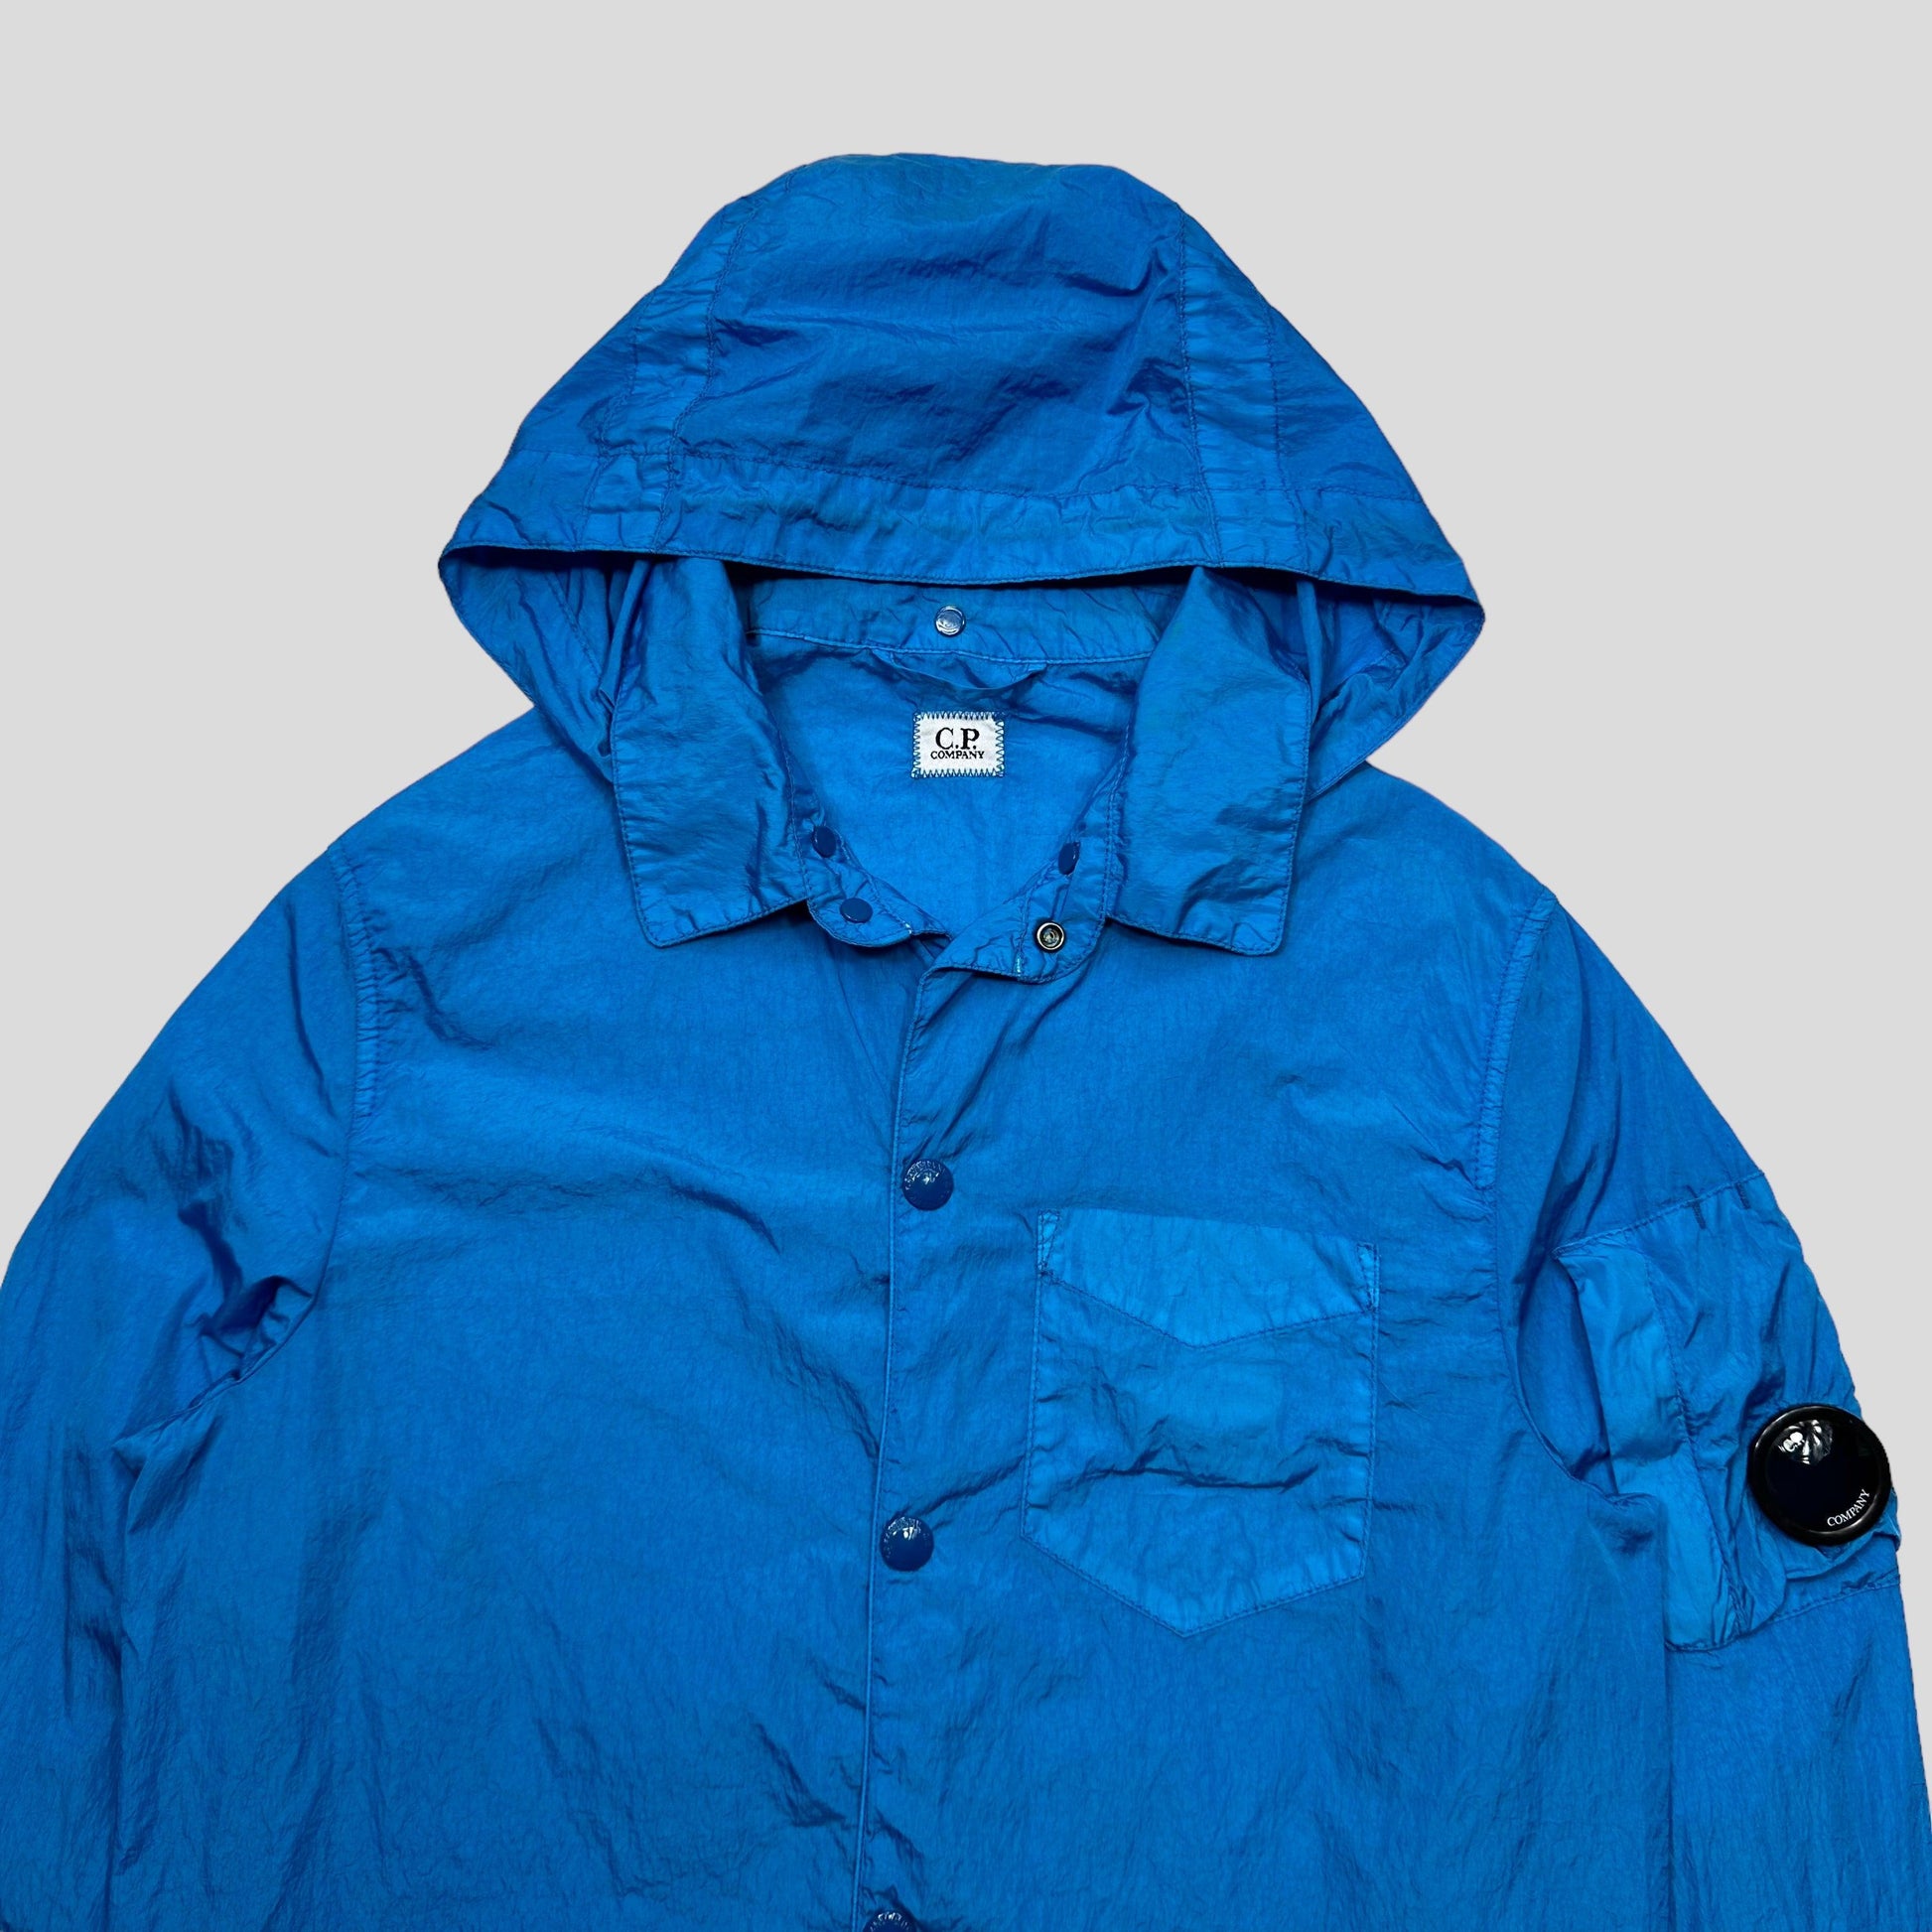 CP Company Nylon Shimmer Lens Jacket - M - Known Source